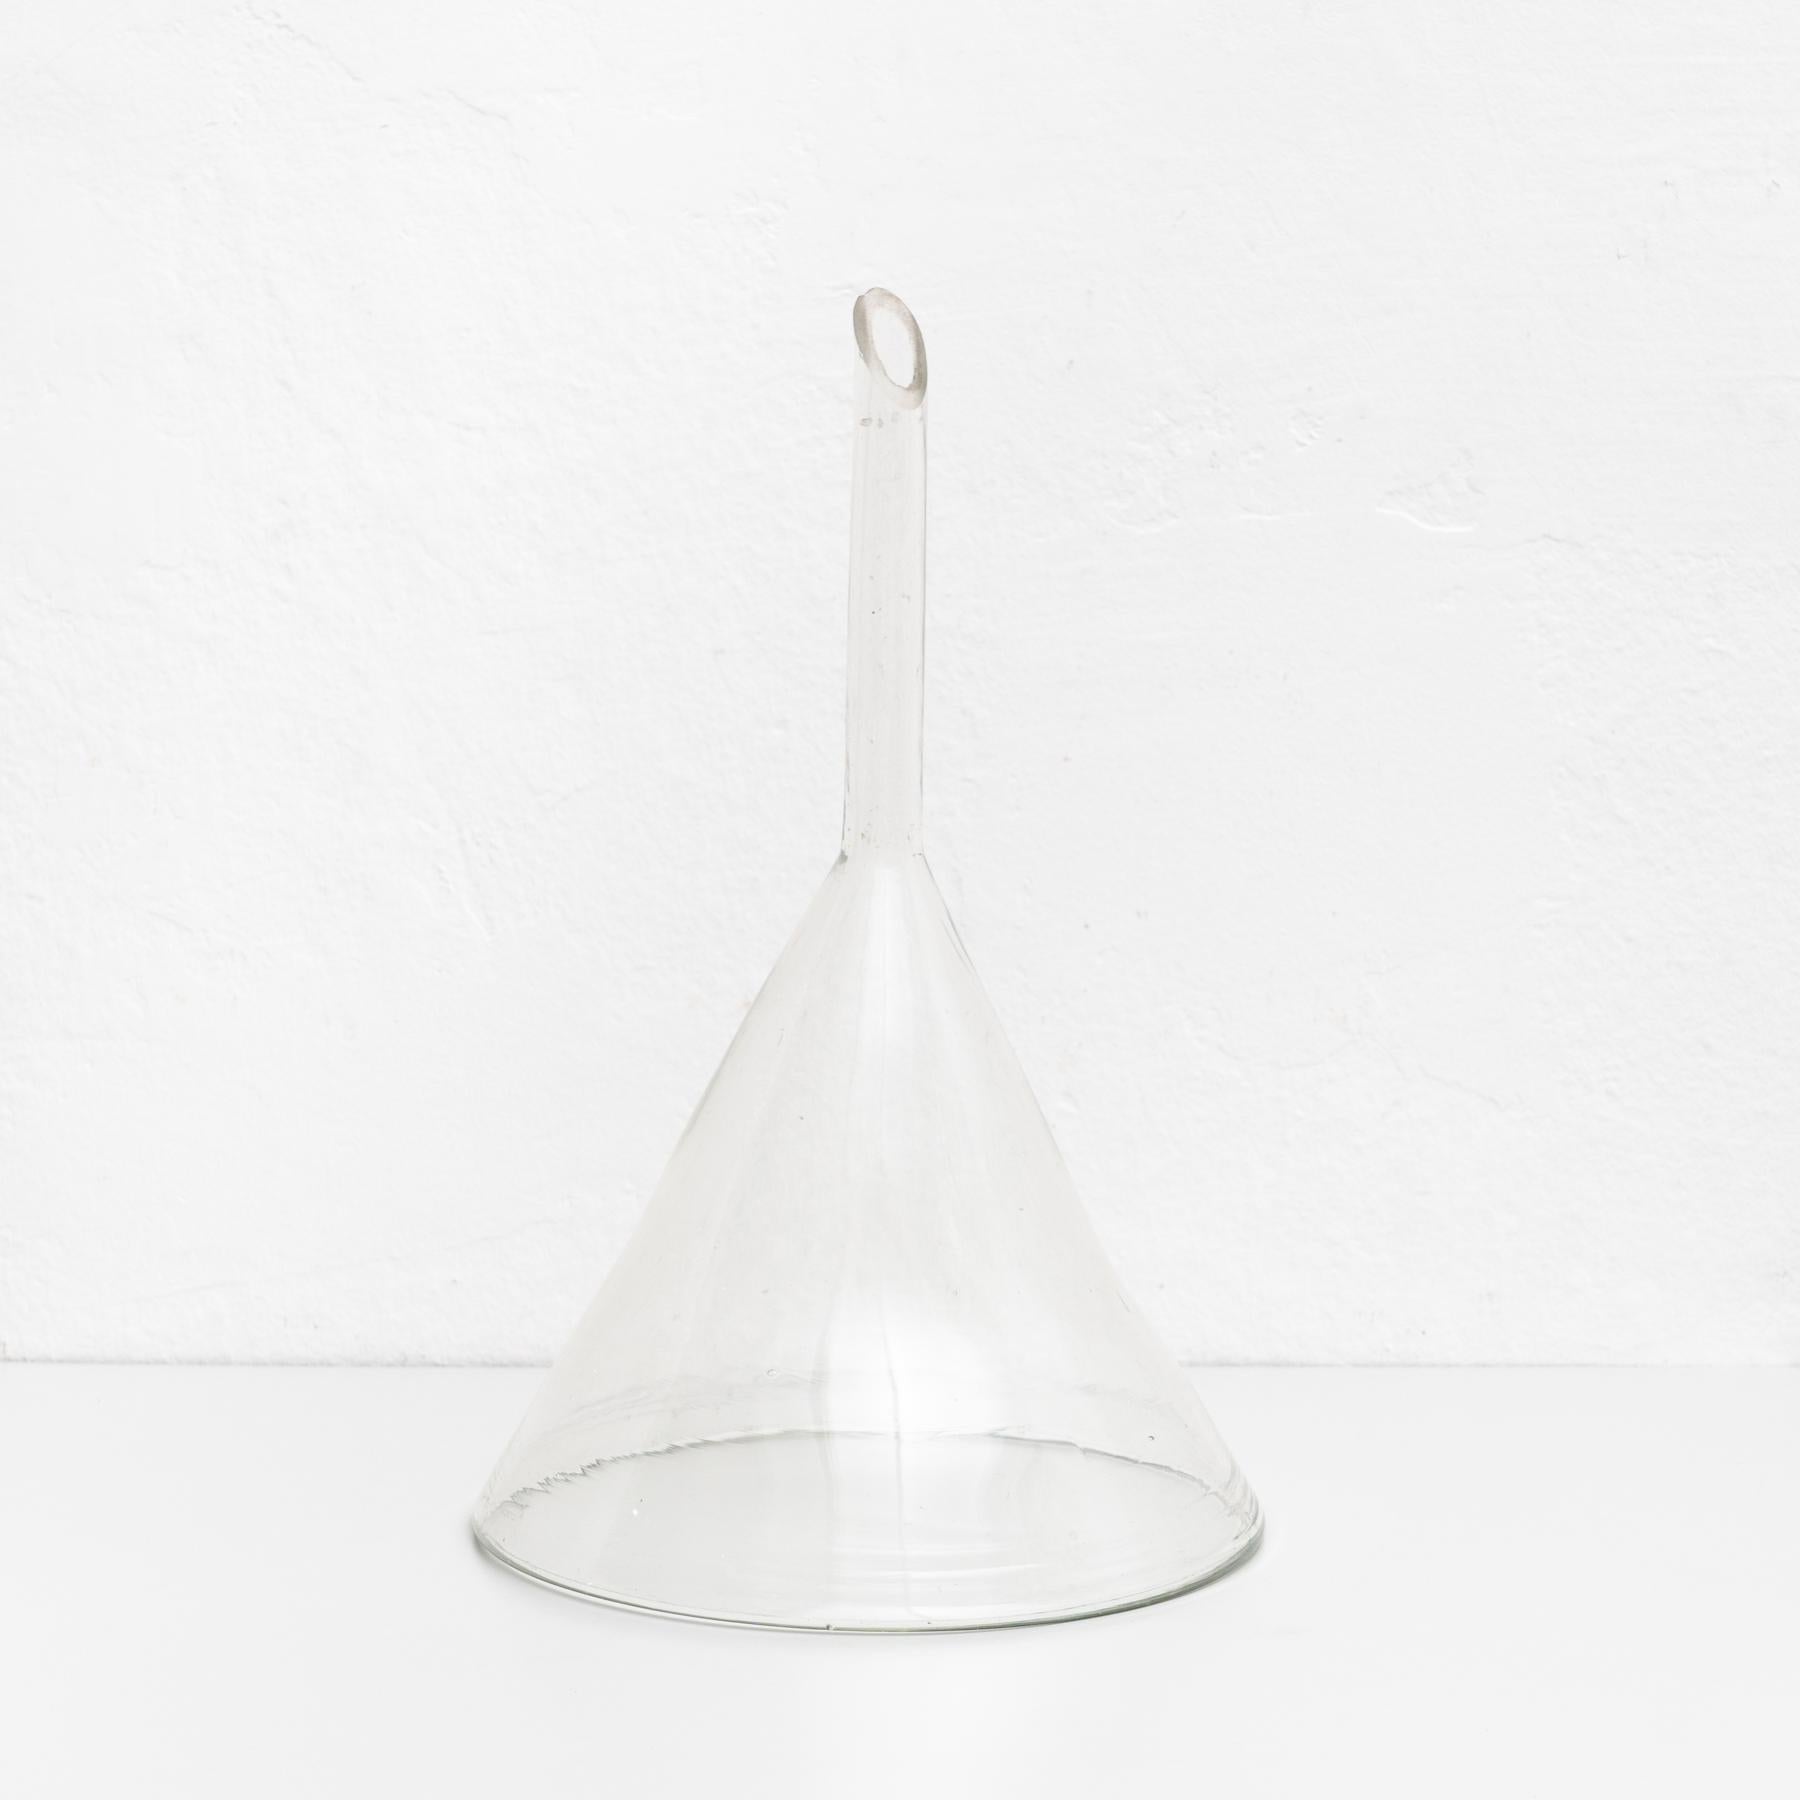 antique glass funnel